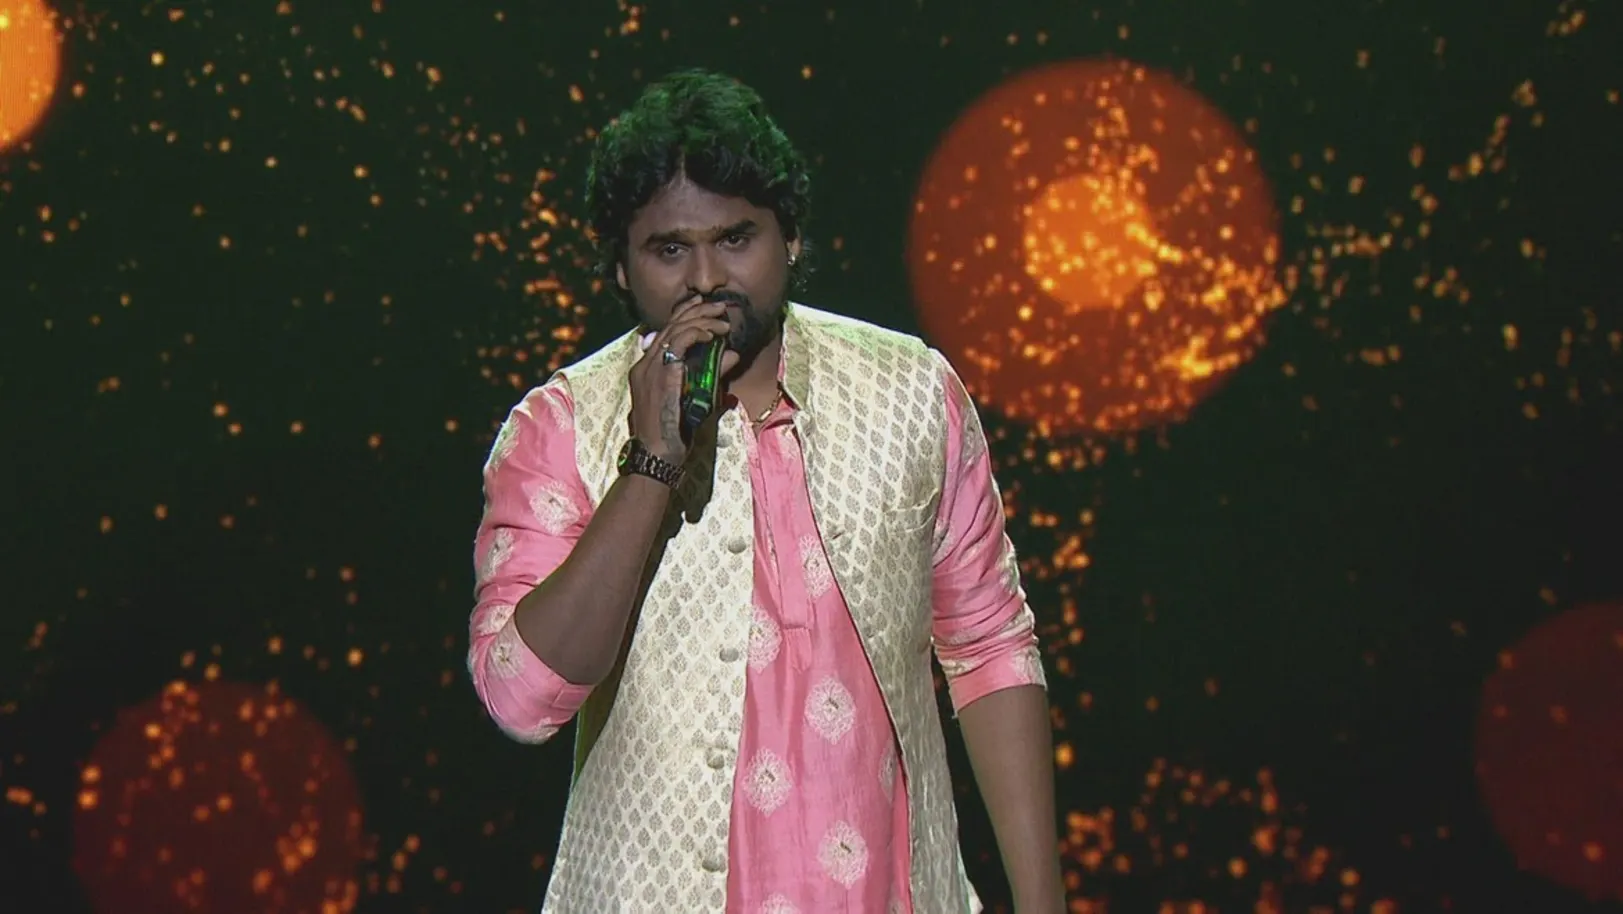 Madhur Shinde performs a devotional song 